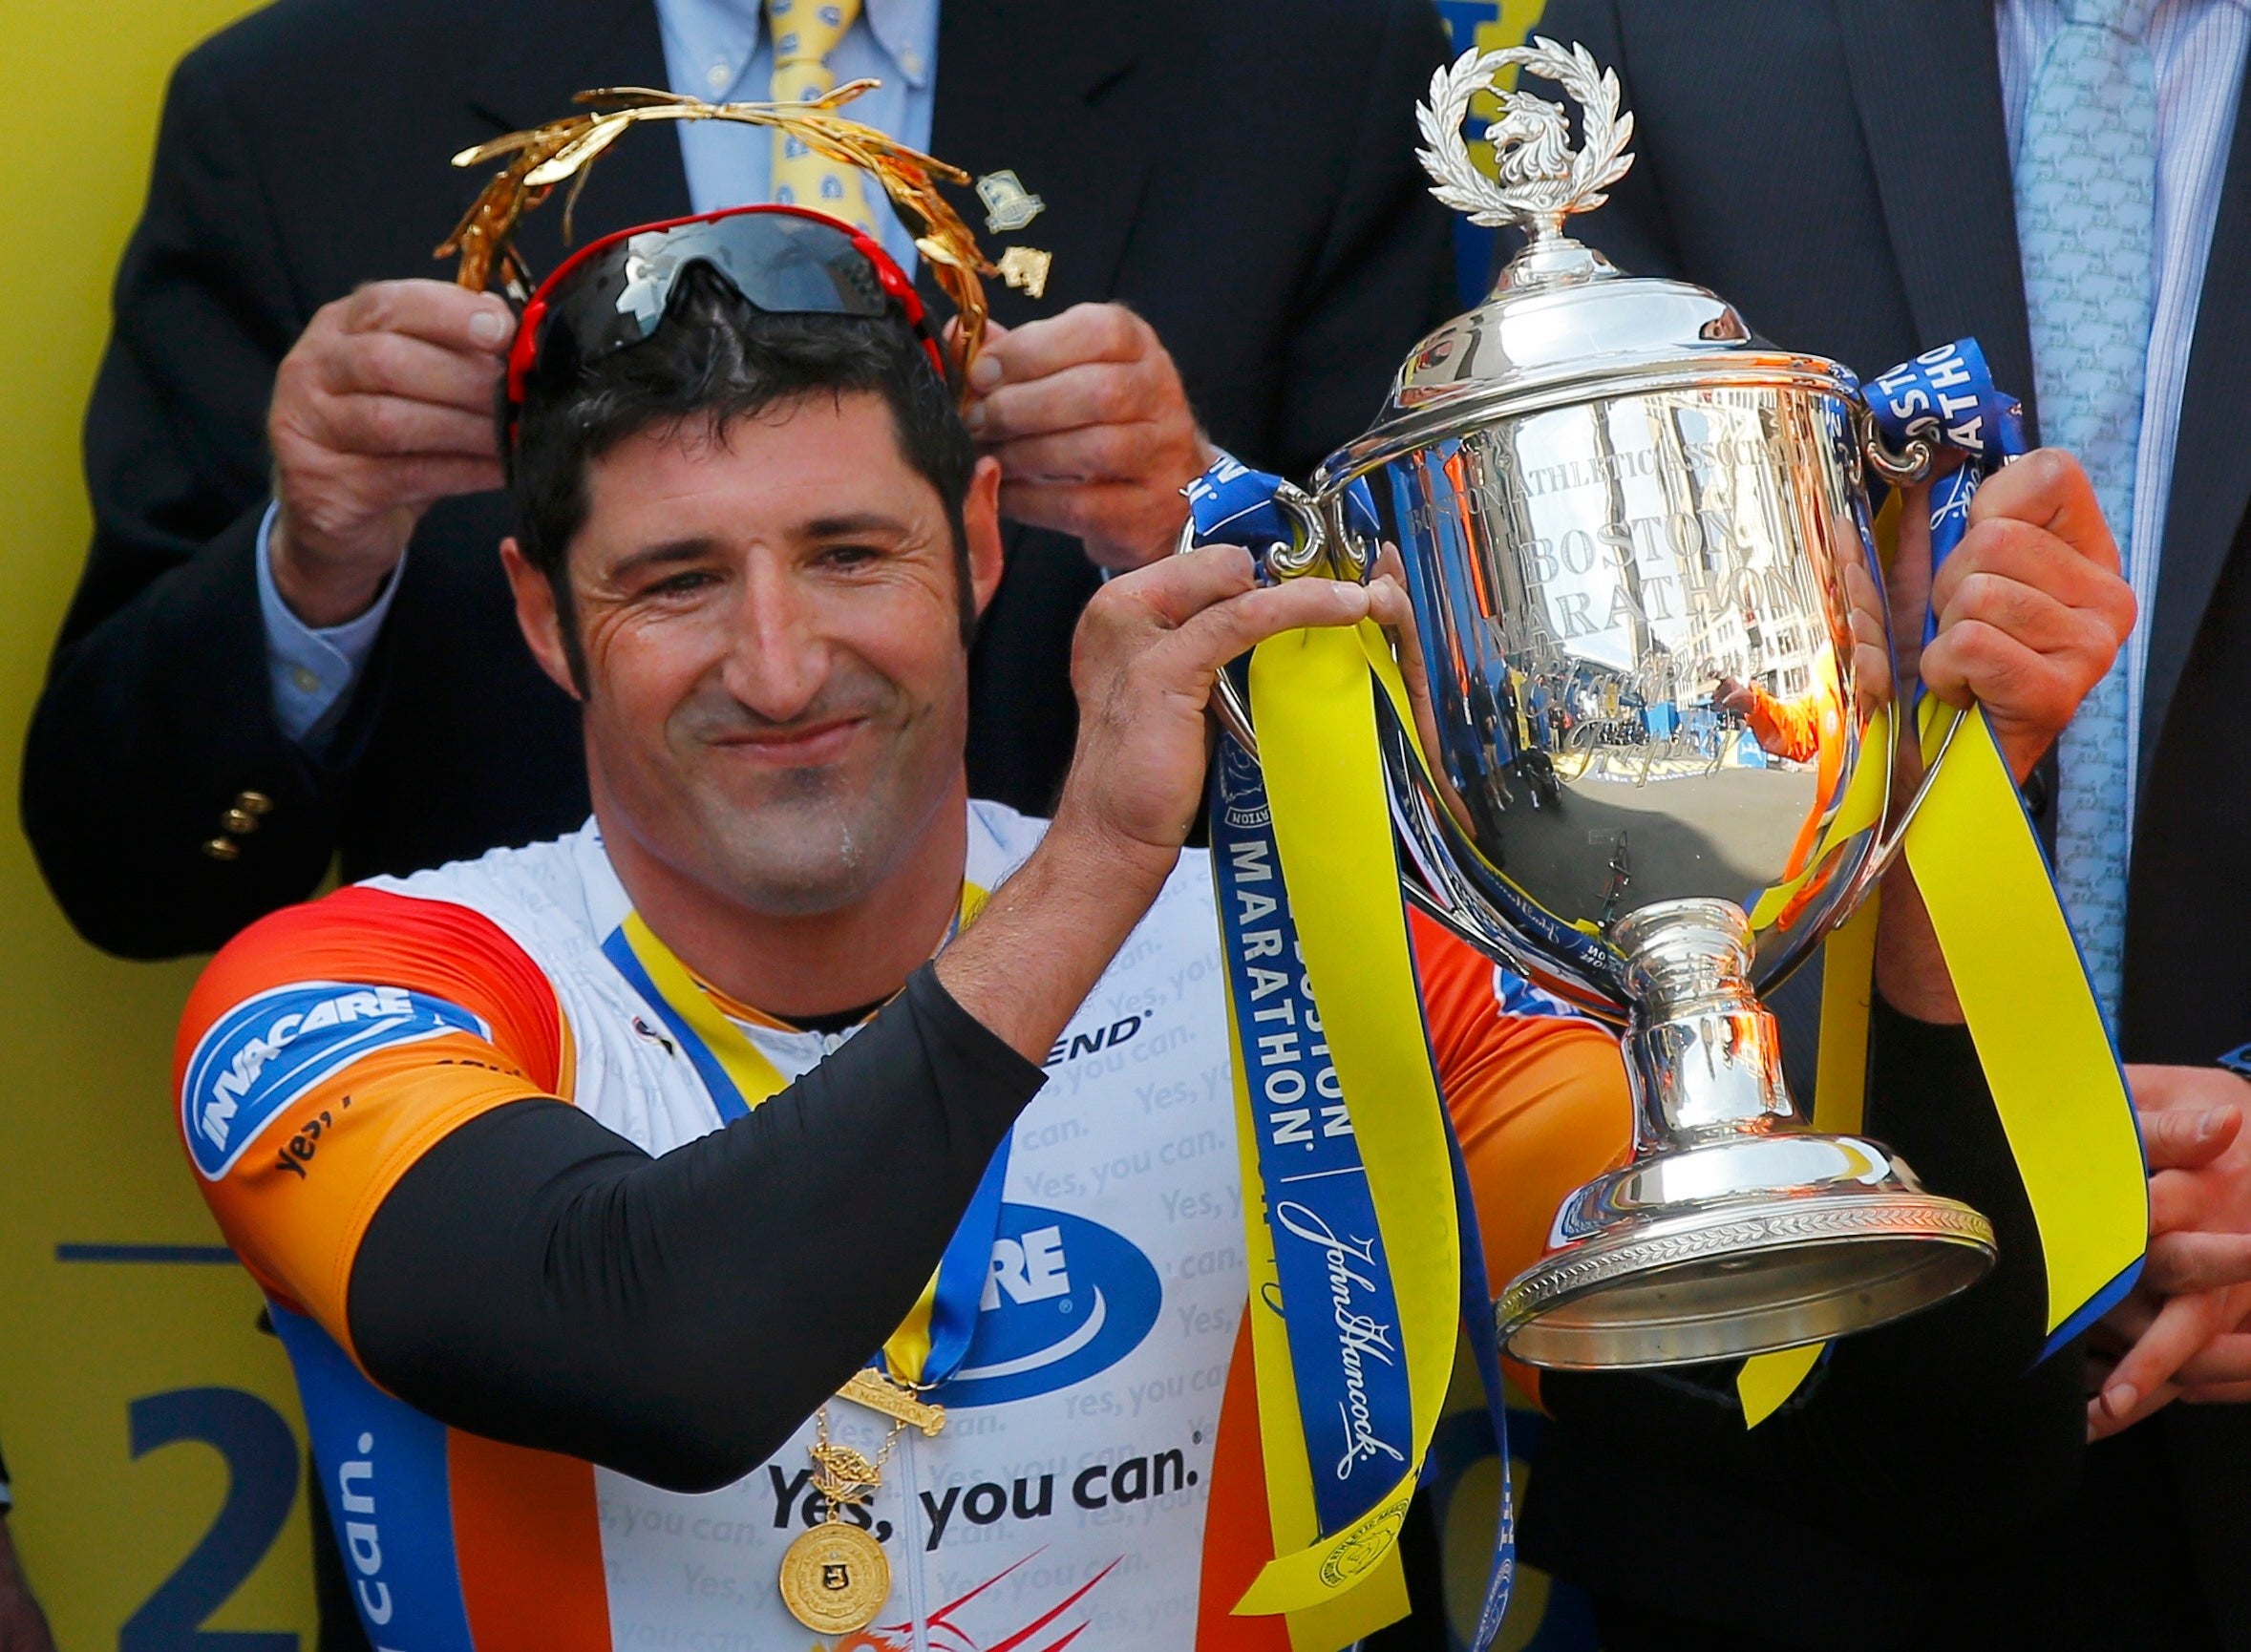 Ernst Van Dyk of South Africa holds the trophy after winning the men's wheelchair division at the 118th running of the Boston Marathon in Boston, Massachusetts April 21, 2014.